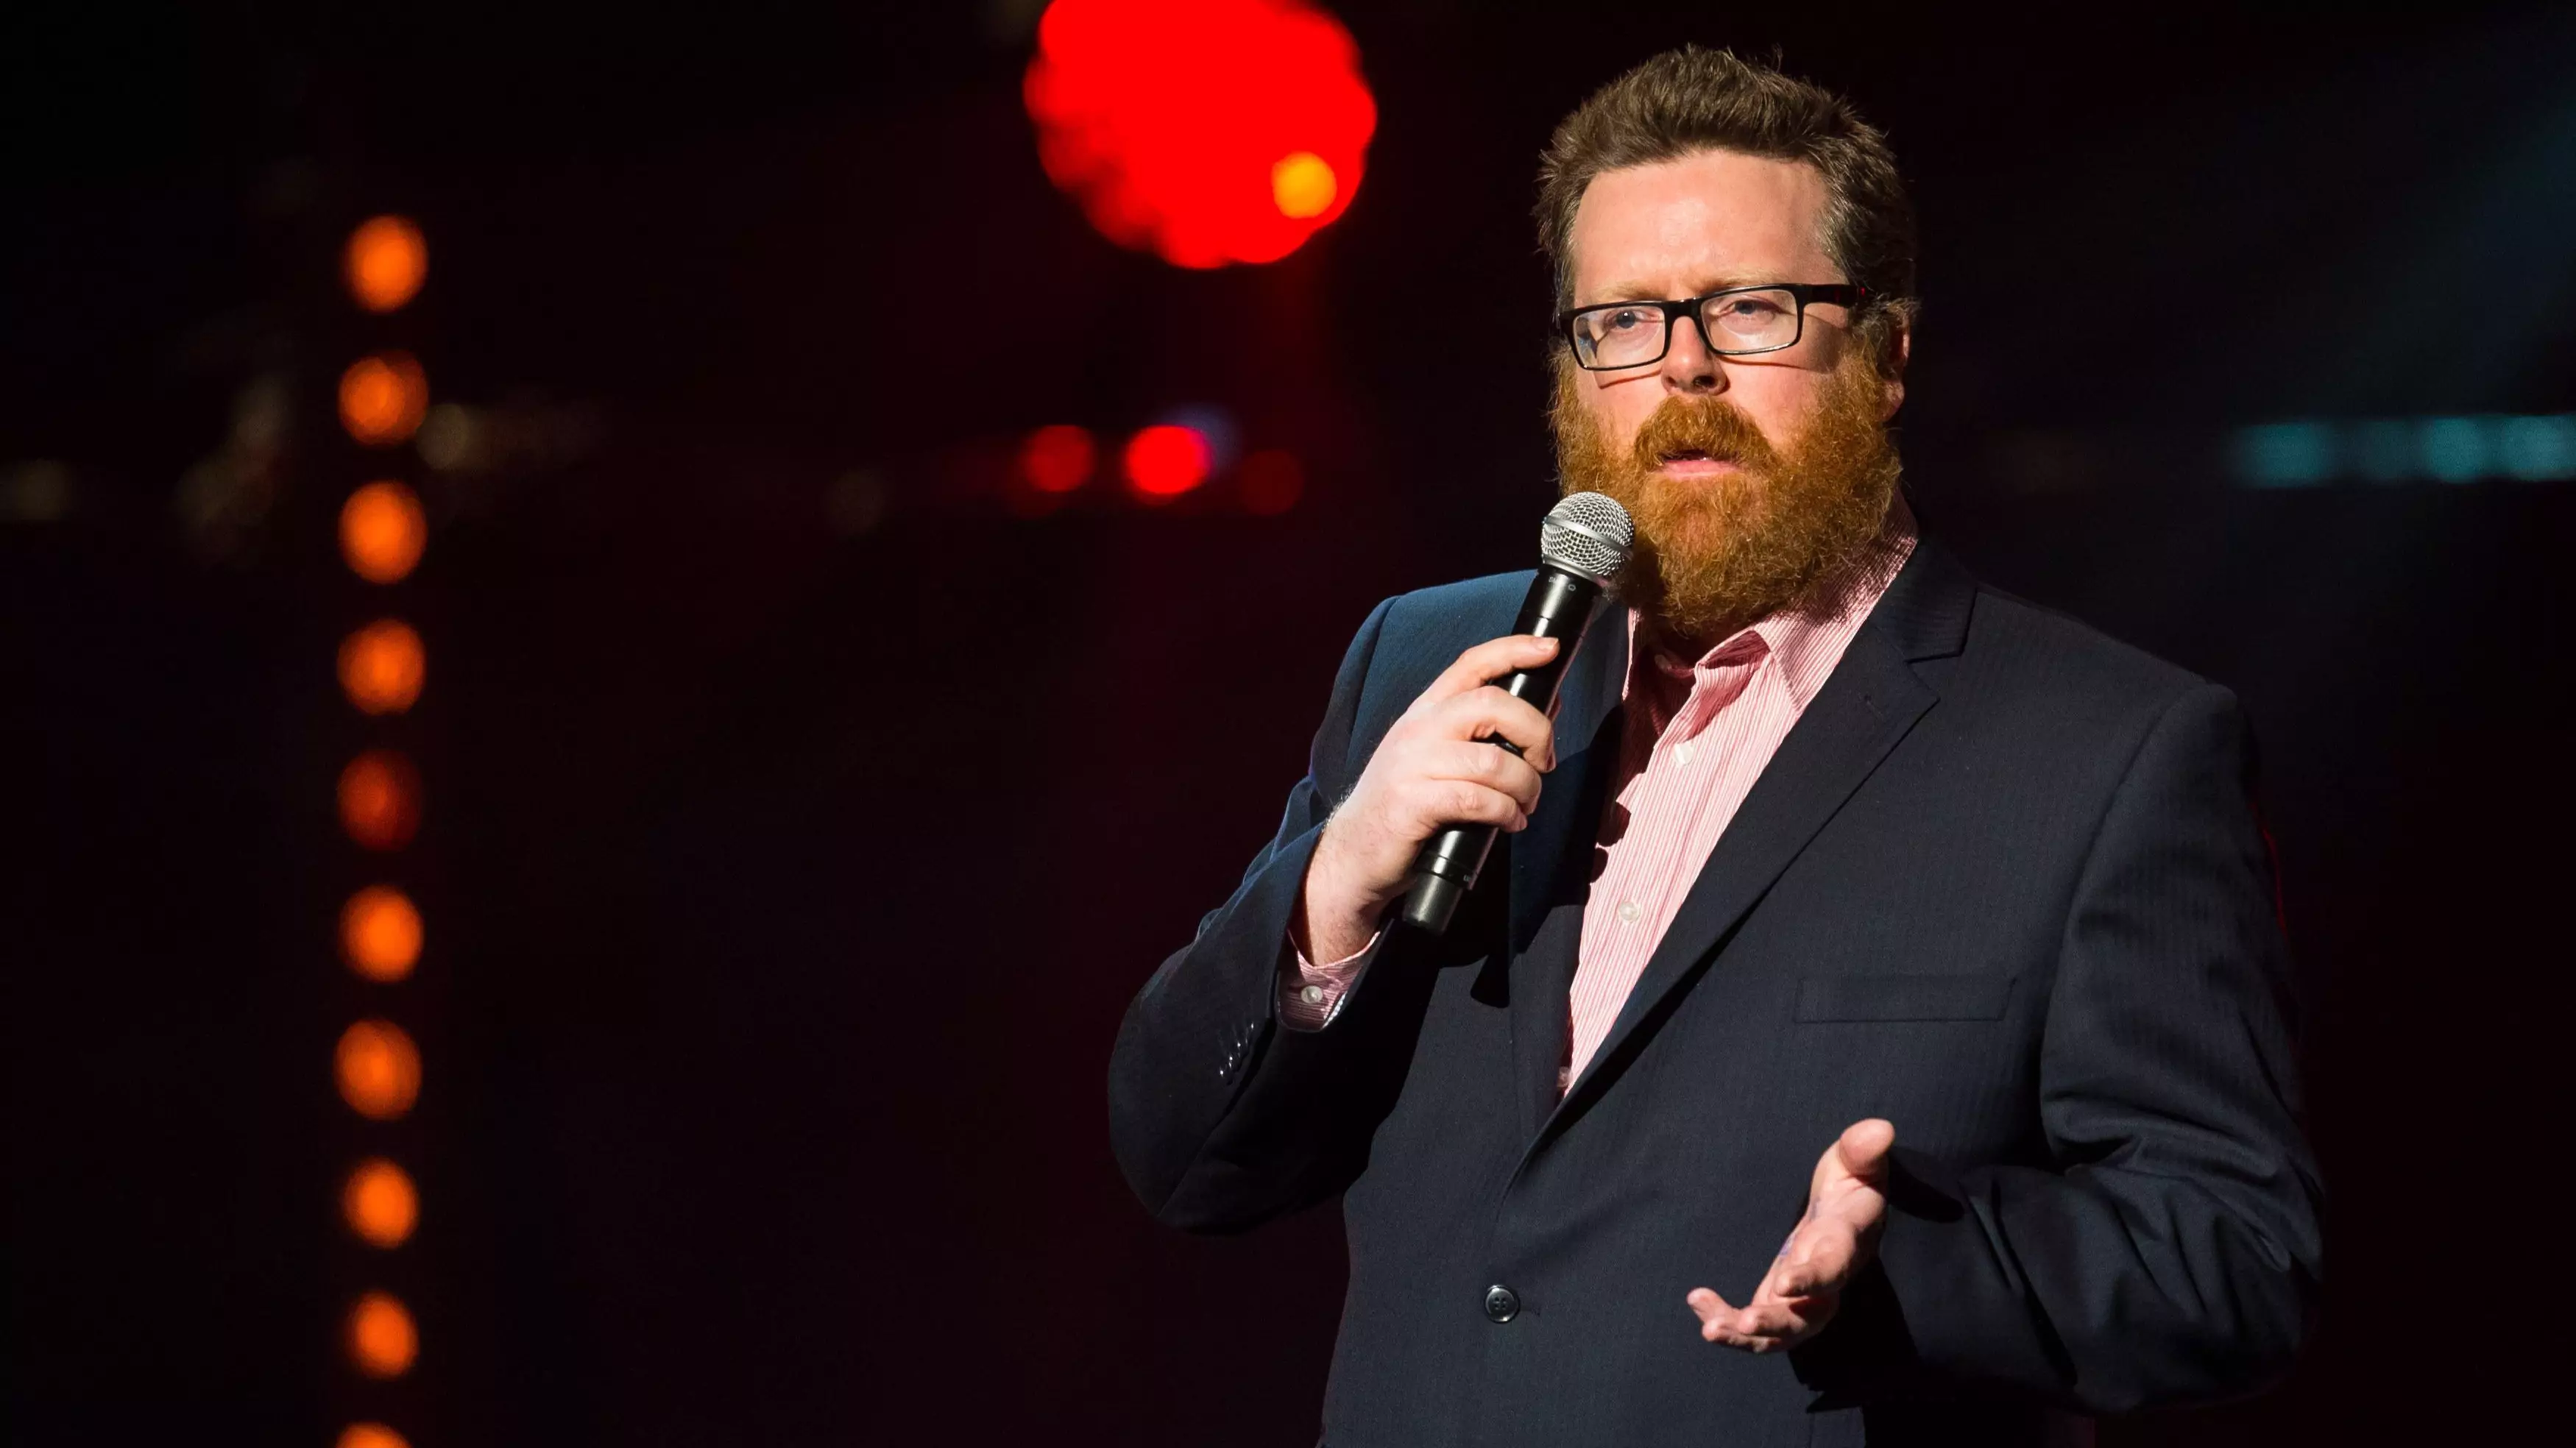 Frankie Boyle Nails Why Everyone Will Watch McGregor vs. Mayweather